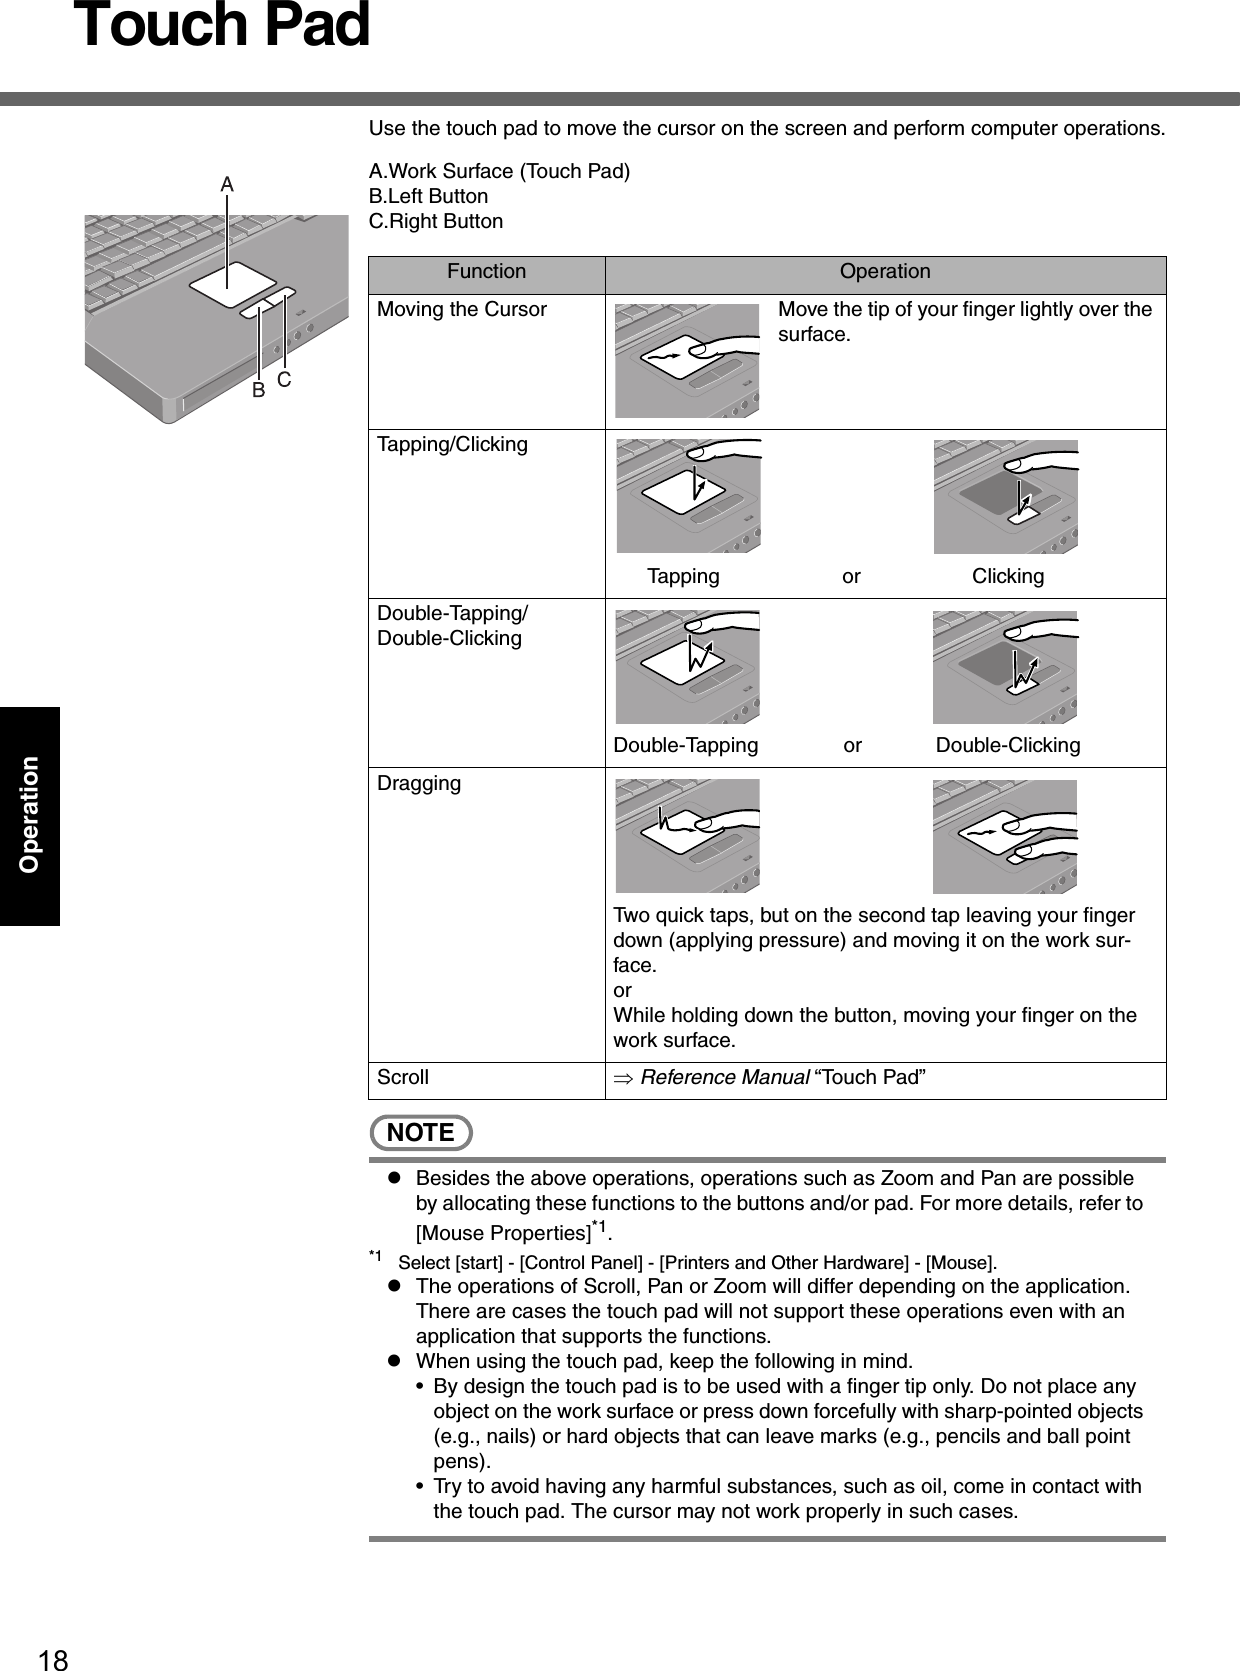 18OperationTouch PadUse the touch pad to move the cursor on the screen and perform computer operations.A.Work Surface (Touch Pad)B.Left ButtonC.Right ButtonNOTEzBesides the above operations, operations such as Zoom and Pan are possible by allocating these functions to the buttons and/or pad. For more details, refer to [Mouse Properties]*1.*1 Select [start] - [Control Panel] - [Printers and Other Hardware] - [Mouse].zThe operations of Scroll, Pan or Zoom will differ depending on the application. There are cases the touch pad will not support these operations even with an application that supports the functions.zWhen using the touch pad, keep the following in mind.• By design the touch pad is to be used with a finger tip only. Do not place any object on the work surface or press down forcefully with sharp-pointed objects (e.g., nails) or hard objects that can leave marks (e.g., pencils and ball point pens).• Try to avoid having any harmful substances, such as oil, come in contact with the touch pad. The cursor may not work properly in such cases.Function OperationMoving the Cursor Move the tip of your finger lightly over the surface.Tapping/ClickingTapping or ClickingDouble-Tapping/Double-ClickingDouble-Tapping or Double-ClickingDraggingTwo quick taps, but on the second tap leaving your finger down (applying pressure) and moving it on the work sur-face.orWhile holding down the button, moving your finger on the work surface.Scroll ⇒ Reference Manual “Touch Pad”